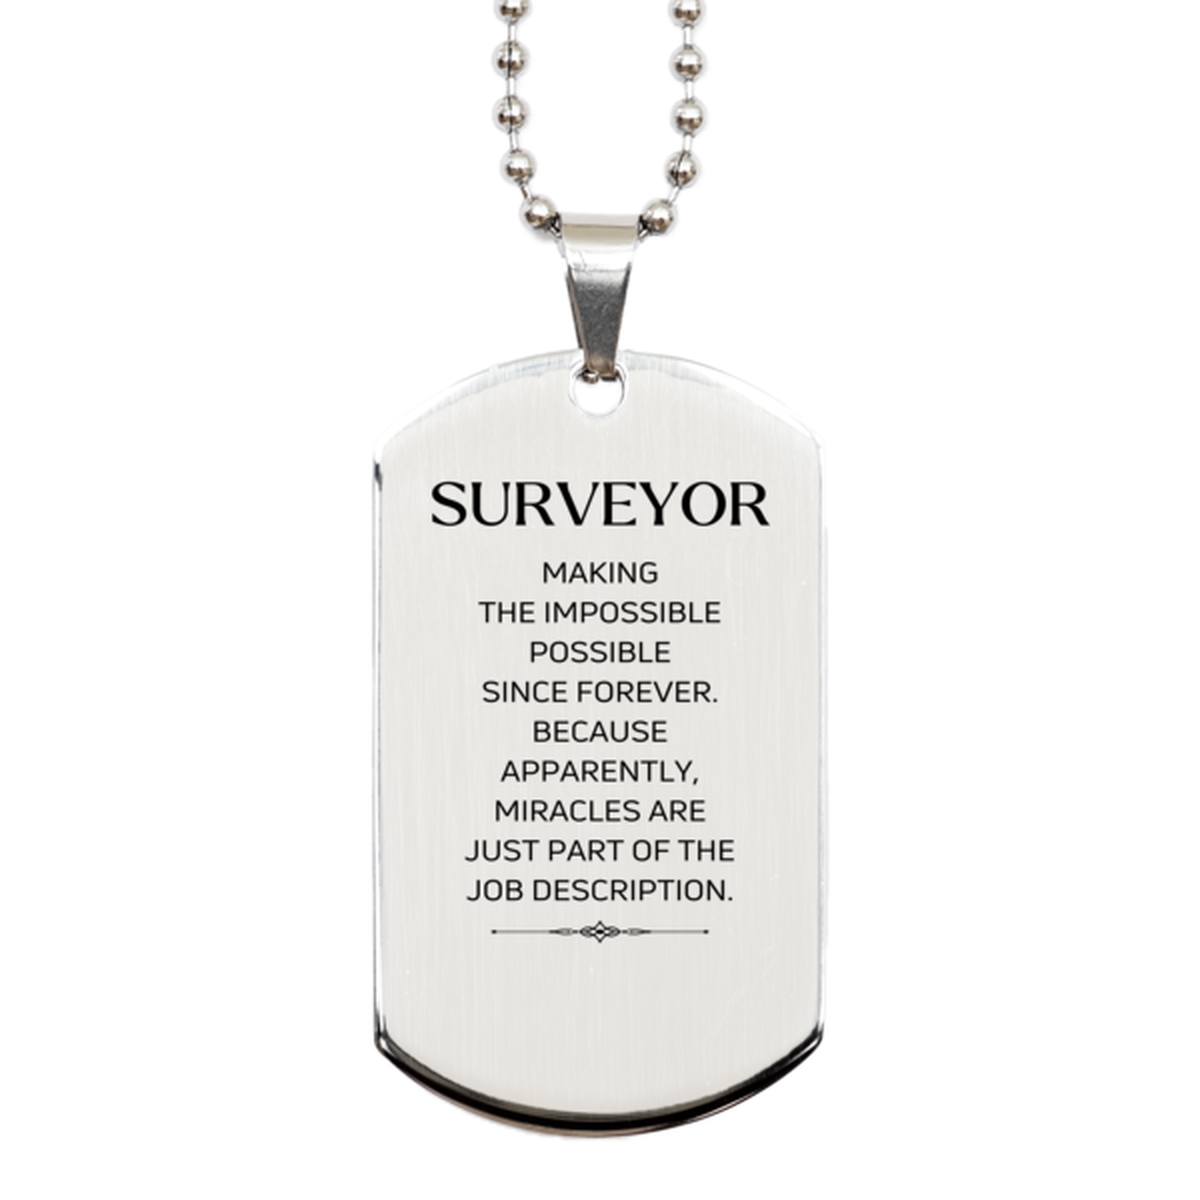 Funny Surveyor Gifts, Miracles are just part of the job description, Inspirational Birthday Silver Dog Tag For Surveyor, Men, Women, Coworkers, Friends, Boss